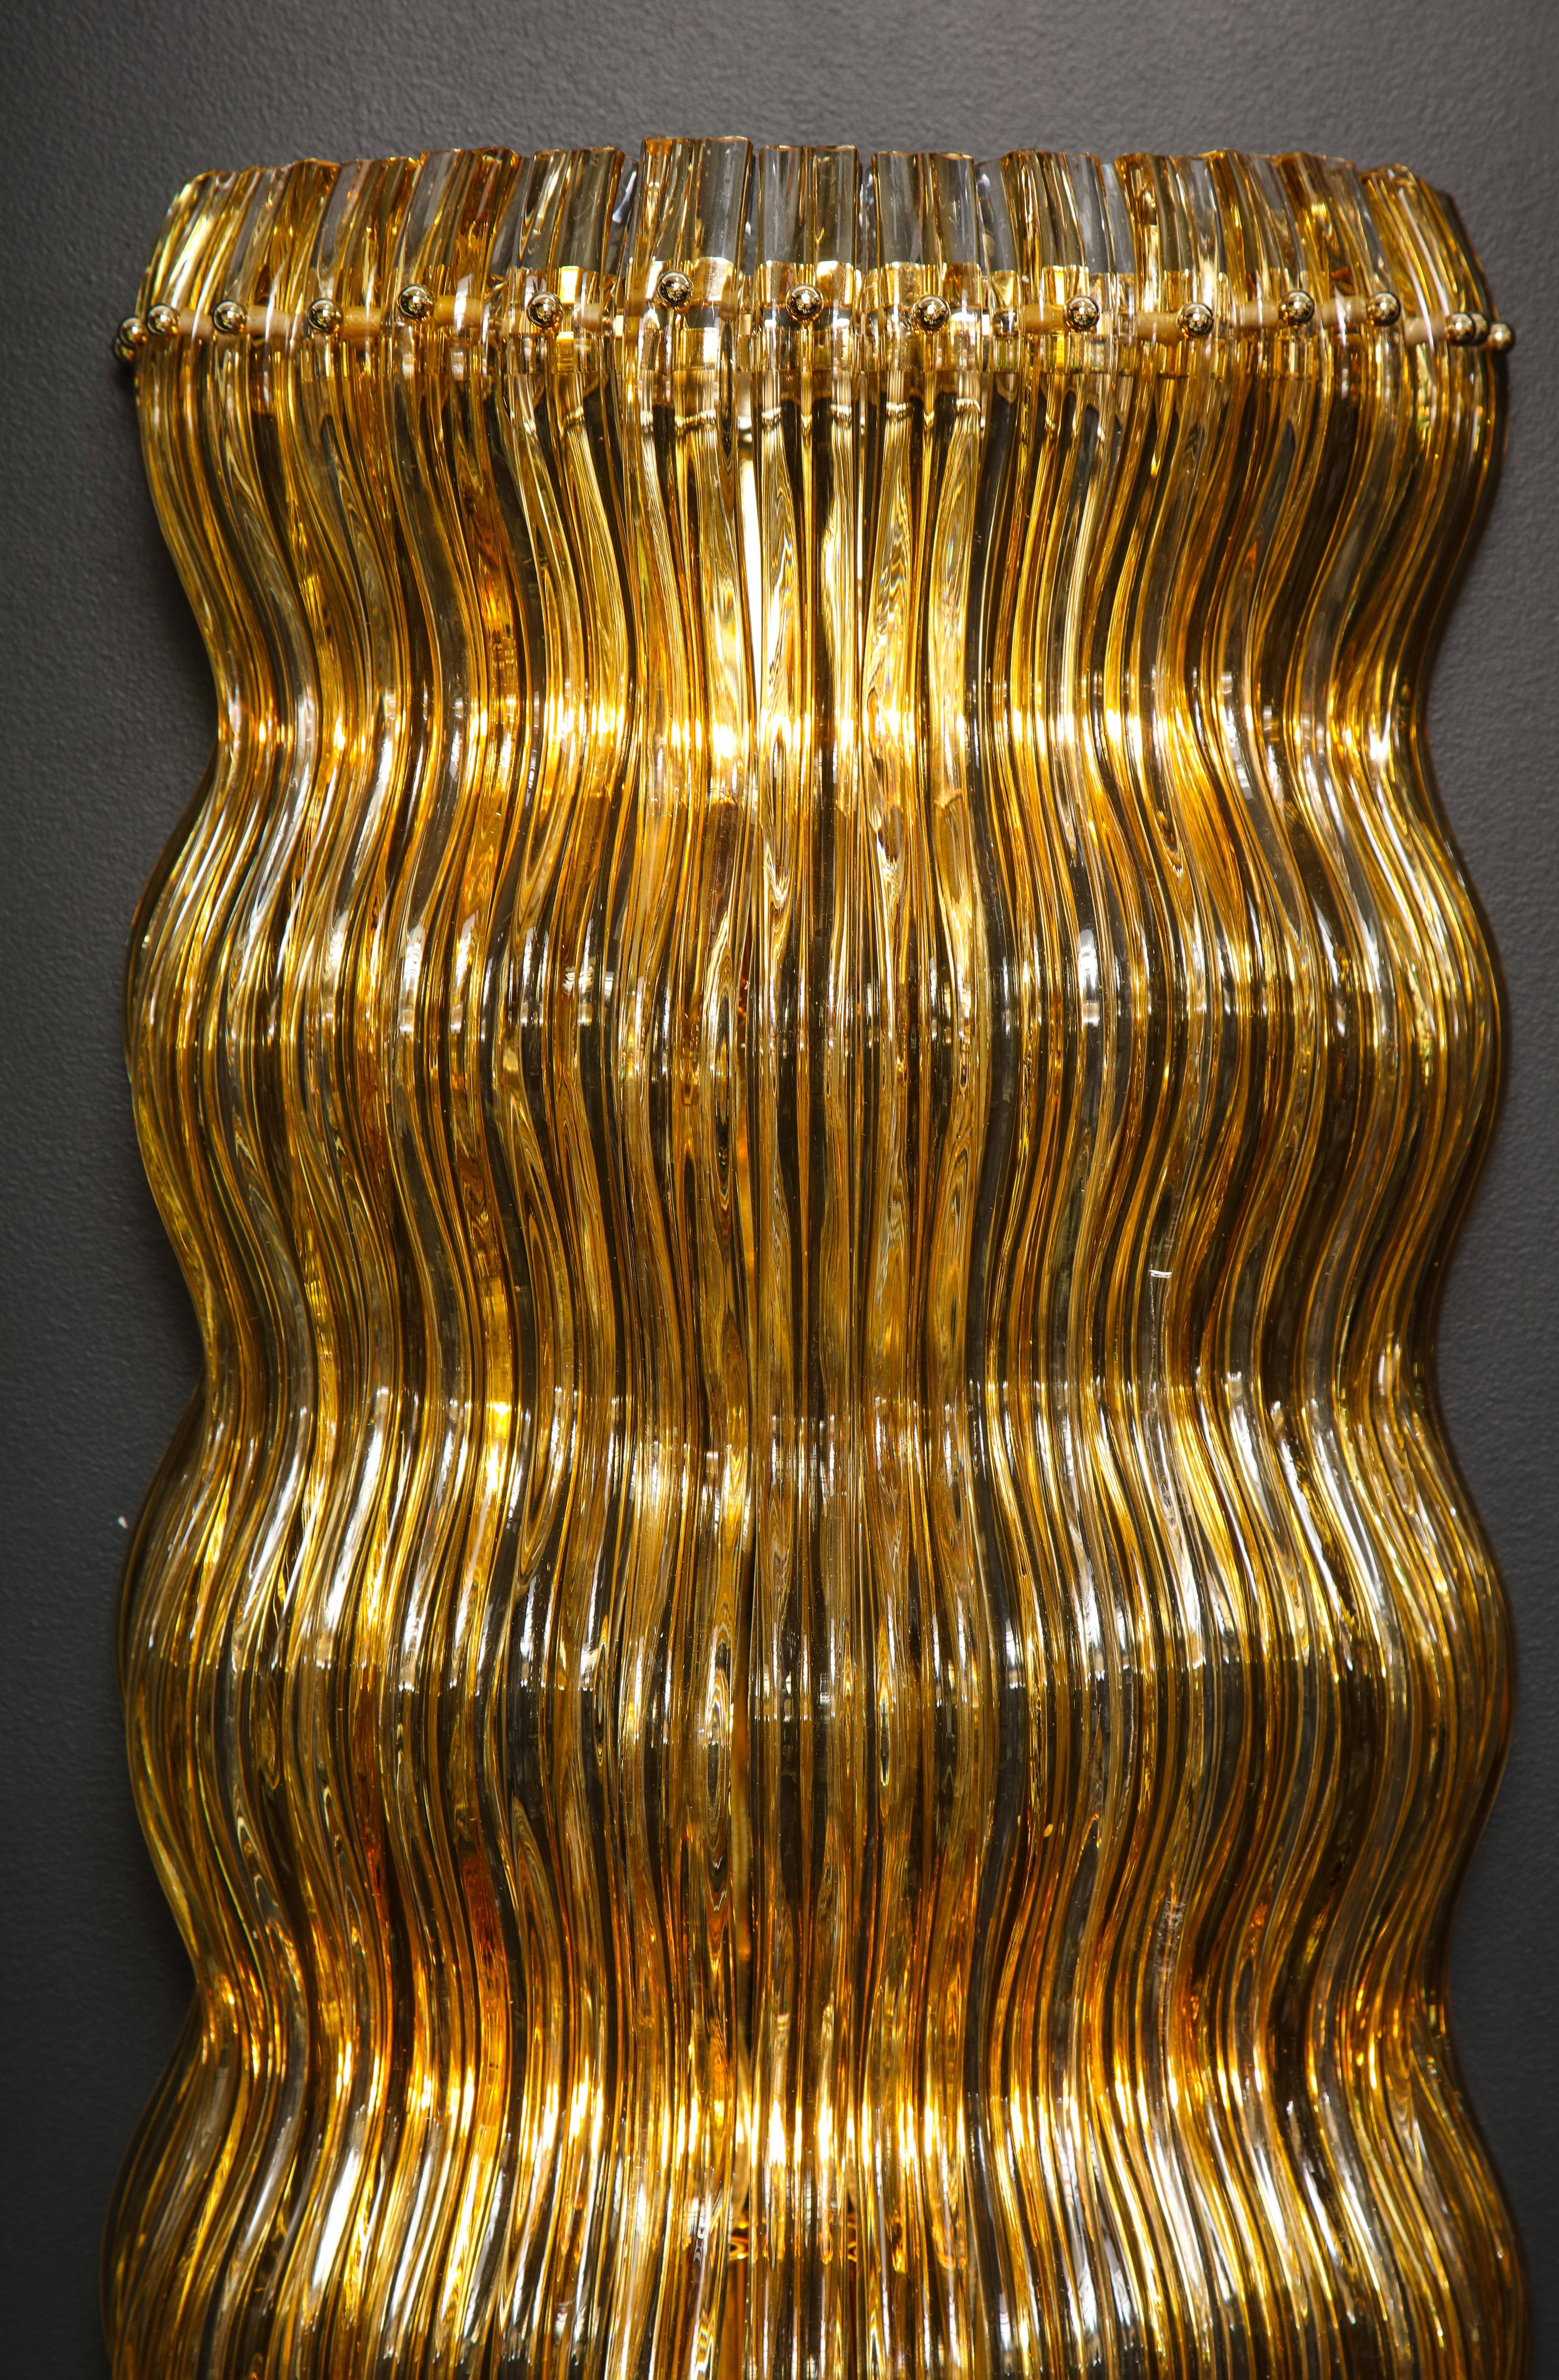 One of kind very large handmade sconces in gold and clear Murano glass in the manner of Venini. Made by a glass master in the last eight remaining original furnaces in Murano, Italy. The glass was shaped while very hot into soft undulating waves,